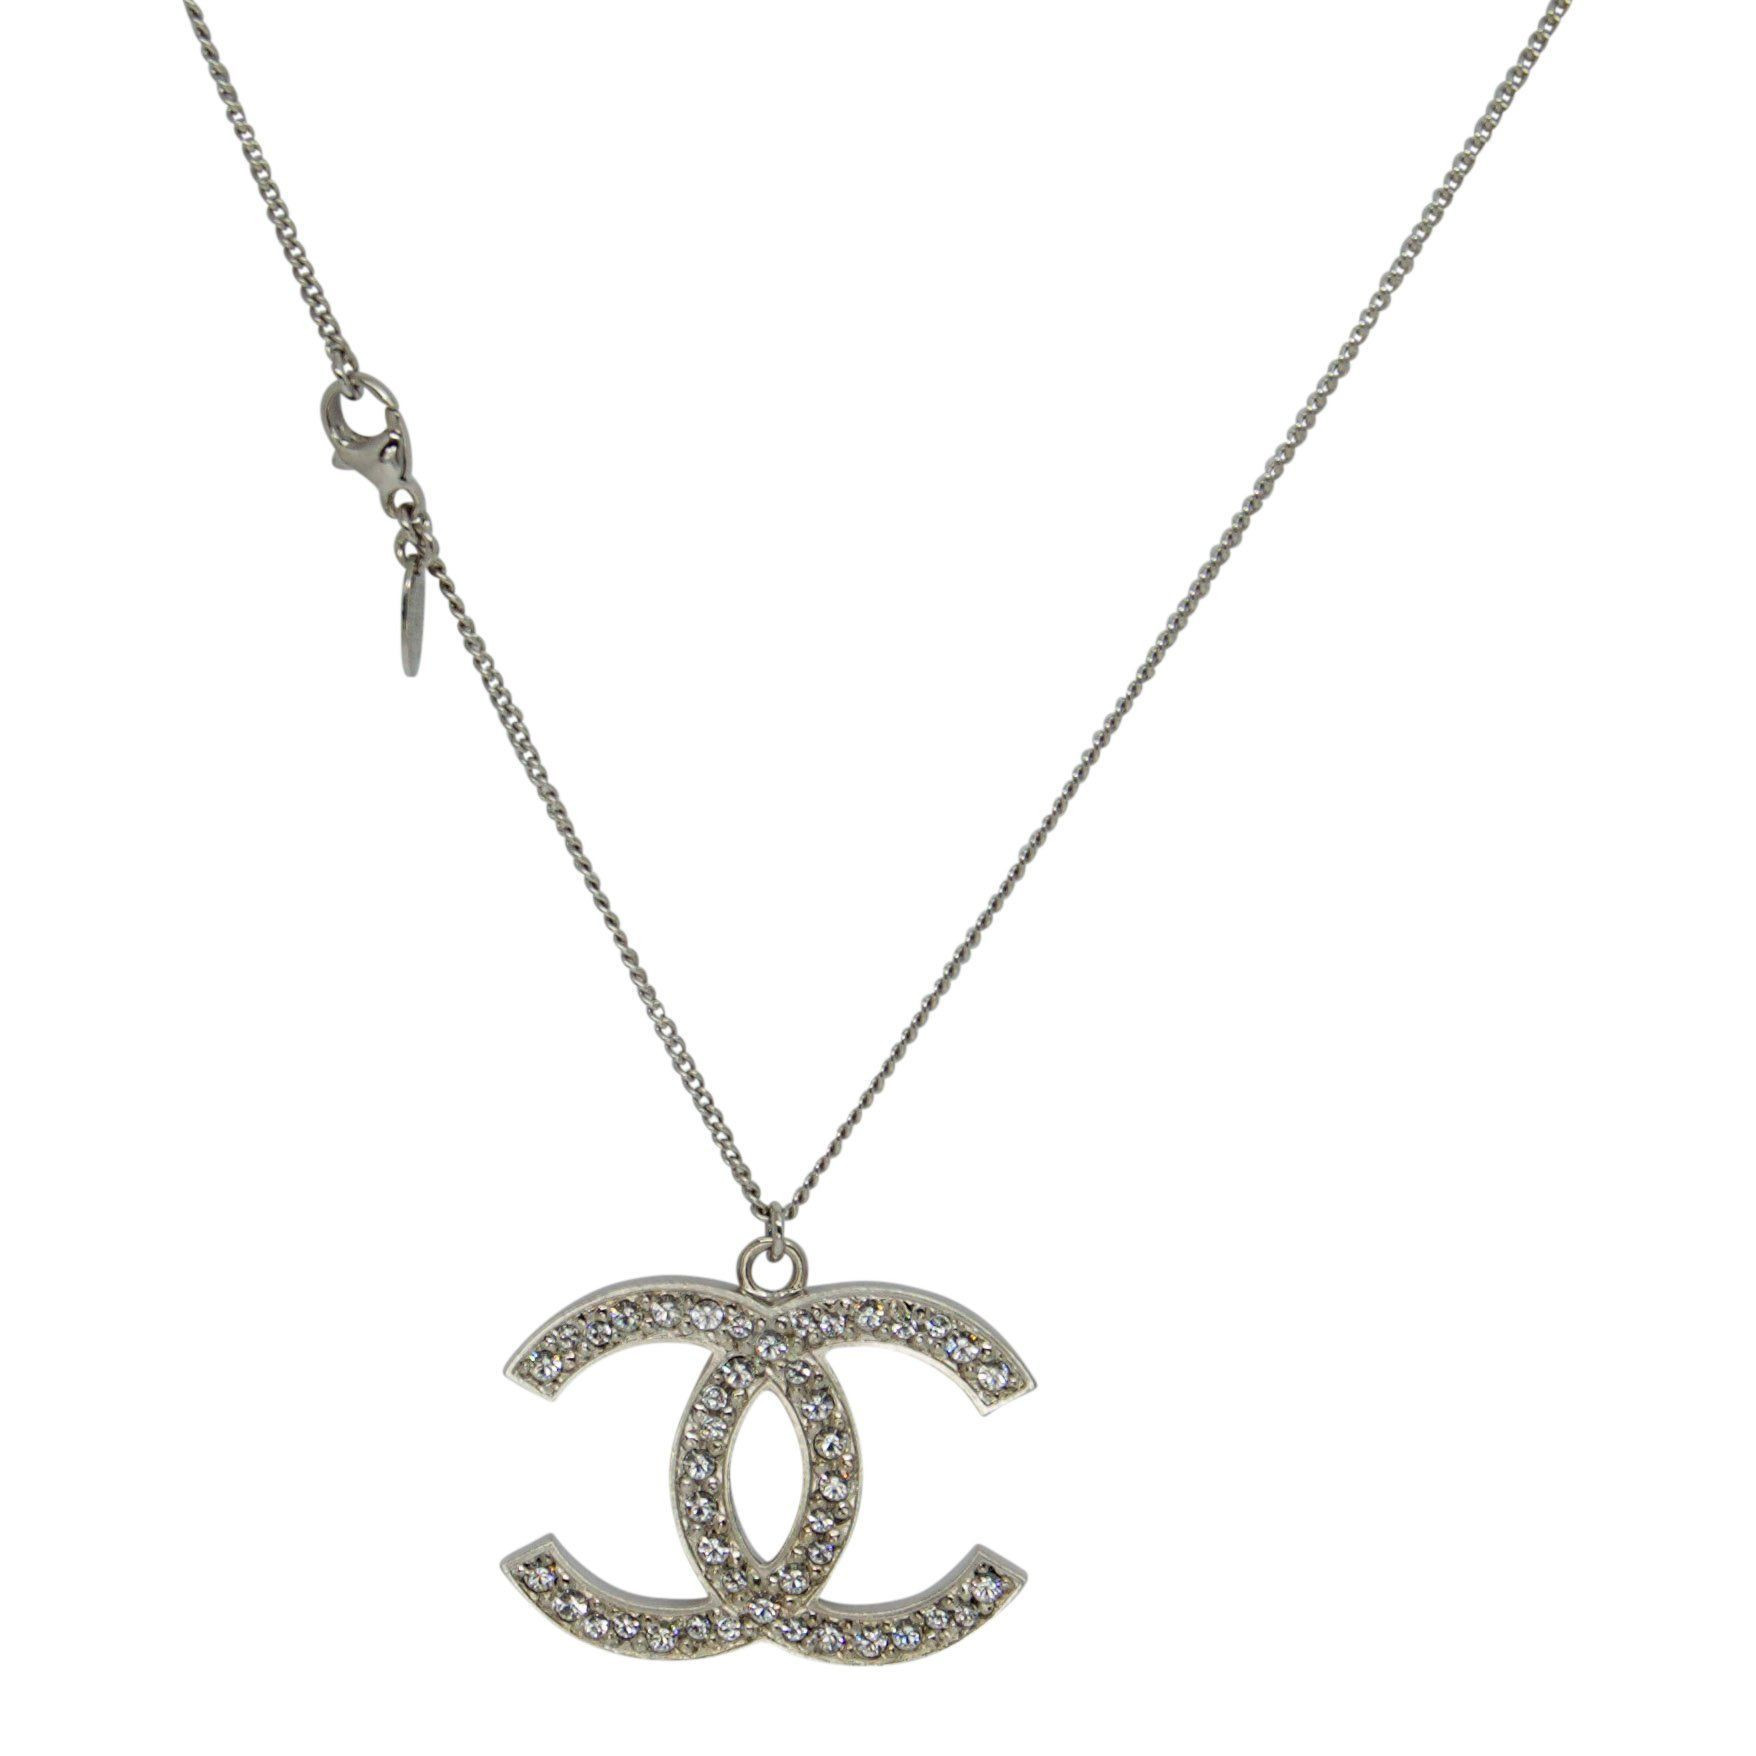 Chanel Pendant Necklace
 Chanel CC Crystal Pendant Necklace– Oliver Jewellery